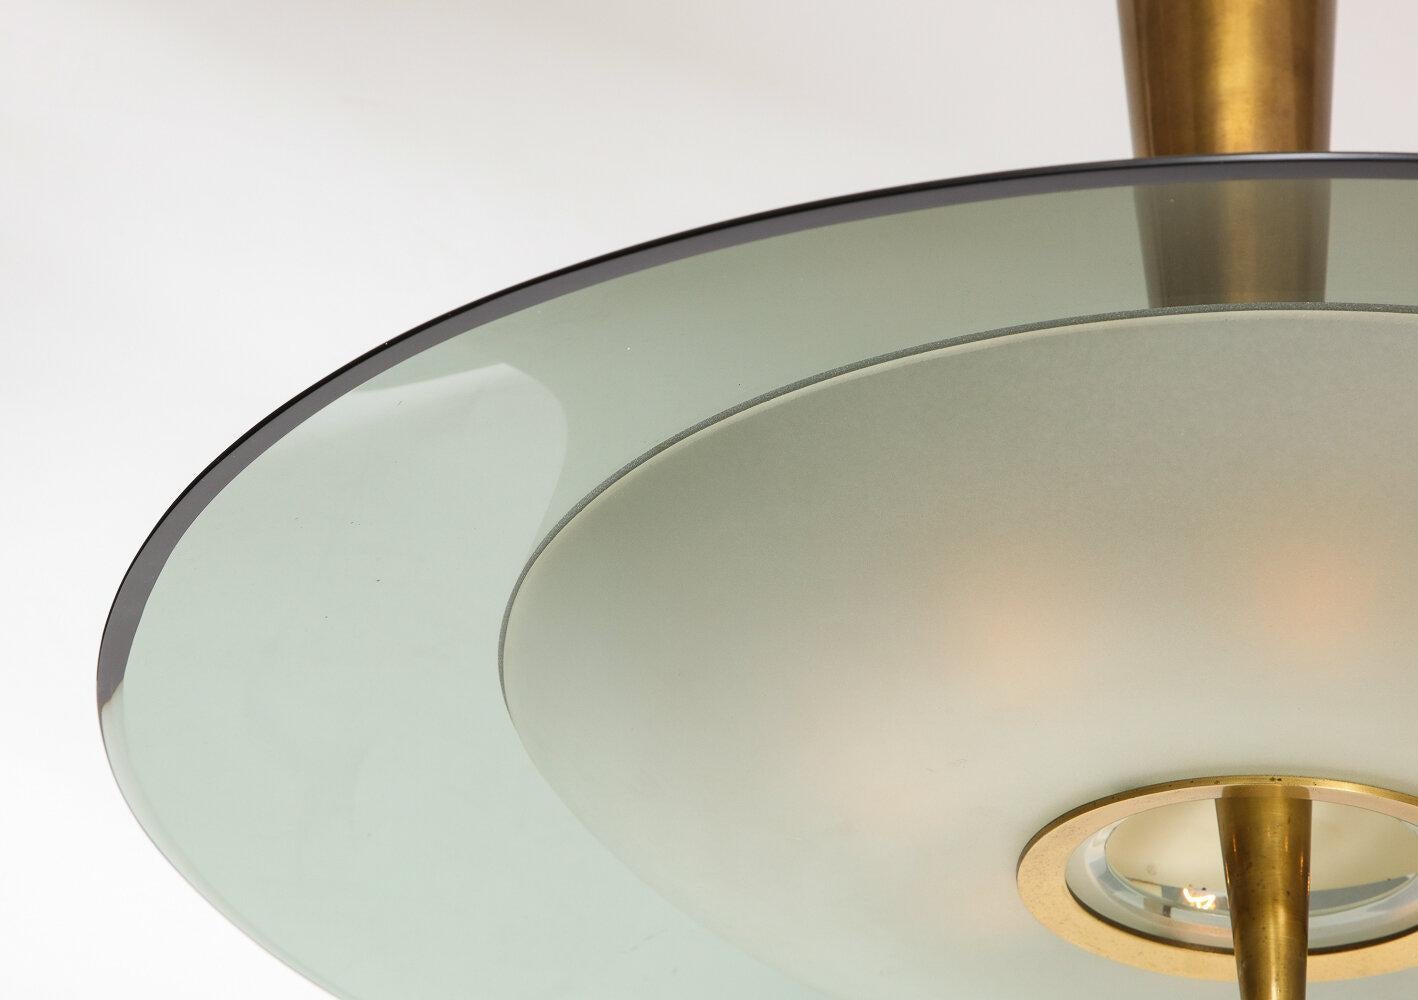 Large saucer pendant featuring a large pale green glass dish and a lower acid-etched bowl with brass mounts. 8 candelabra sockets, recently replaced and newly rewired.